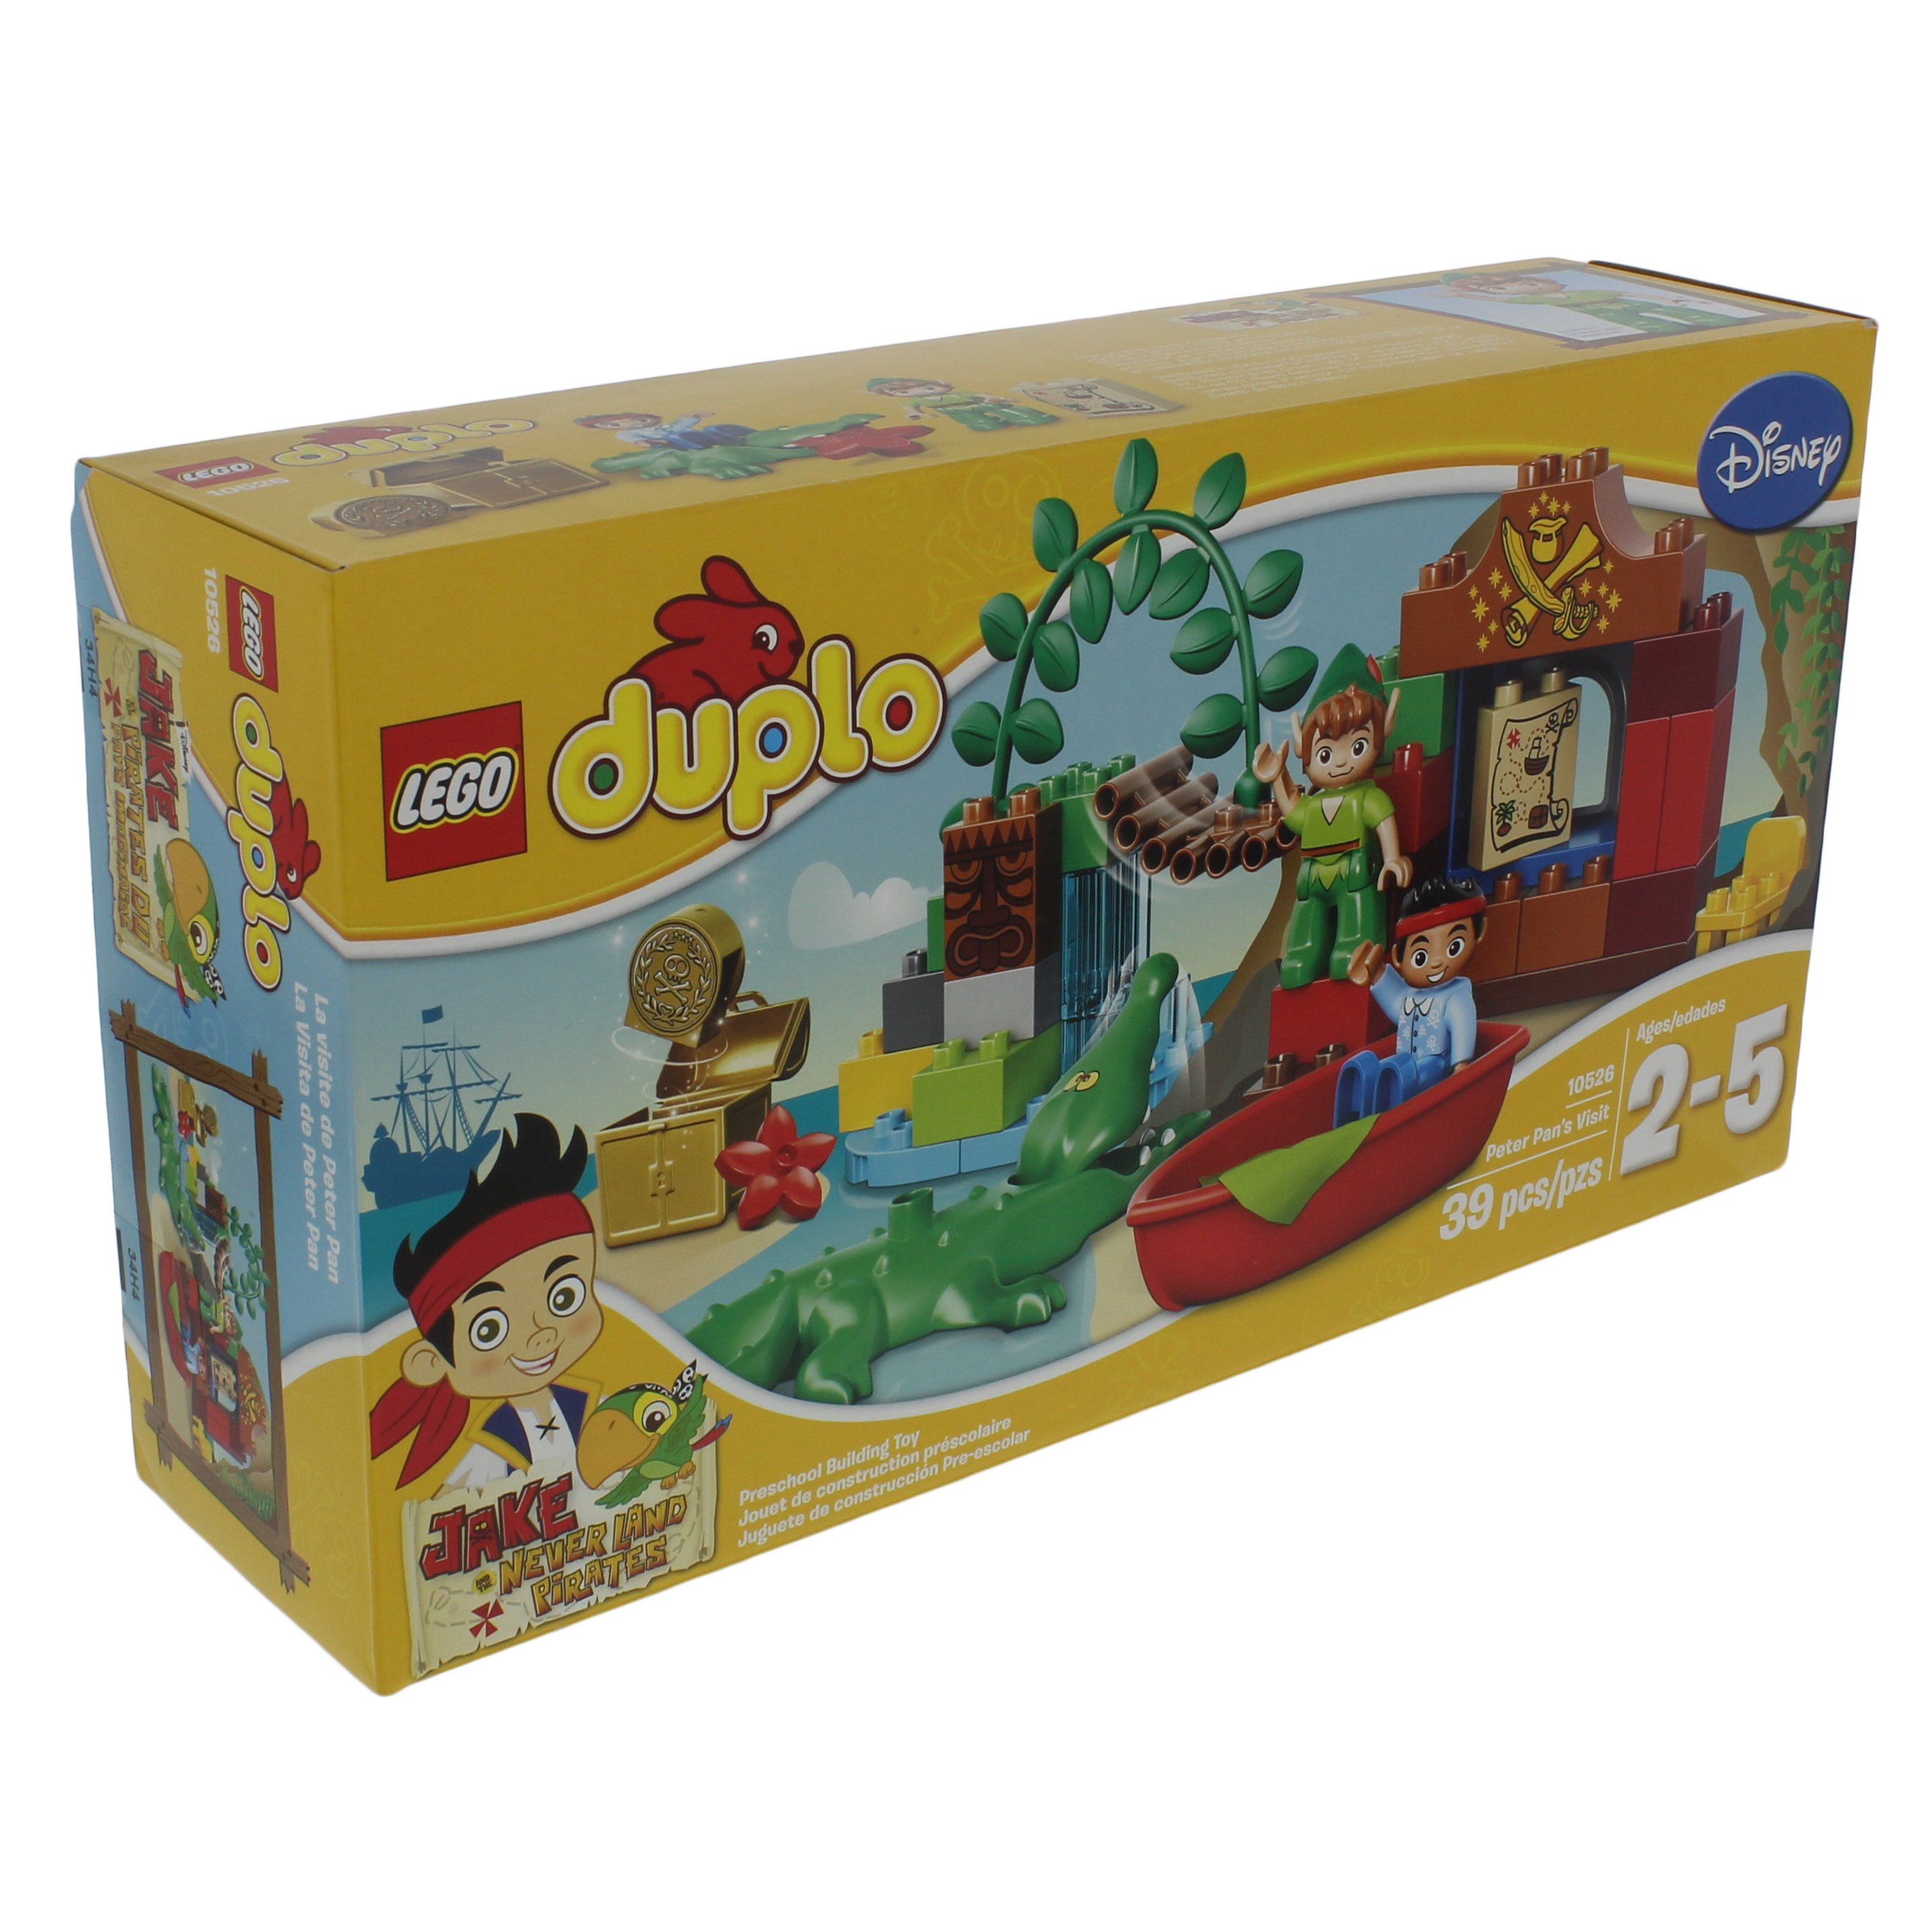 Laws and regulations Joint Bible LEGO DUPLO Jake and the Never Land Pirates, Peter Pan's Visit - Shop LEGO DUPLO  Jake and the Never Land Pirates, Peter Pan's Visit - Shop LEGO DUPLO Jake  and the Never